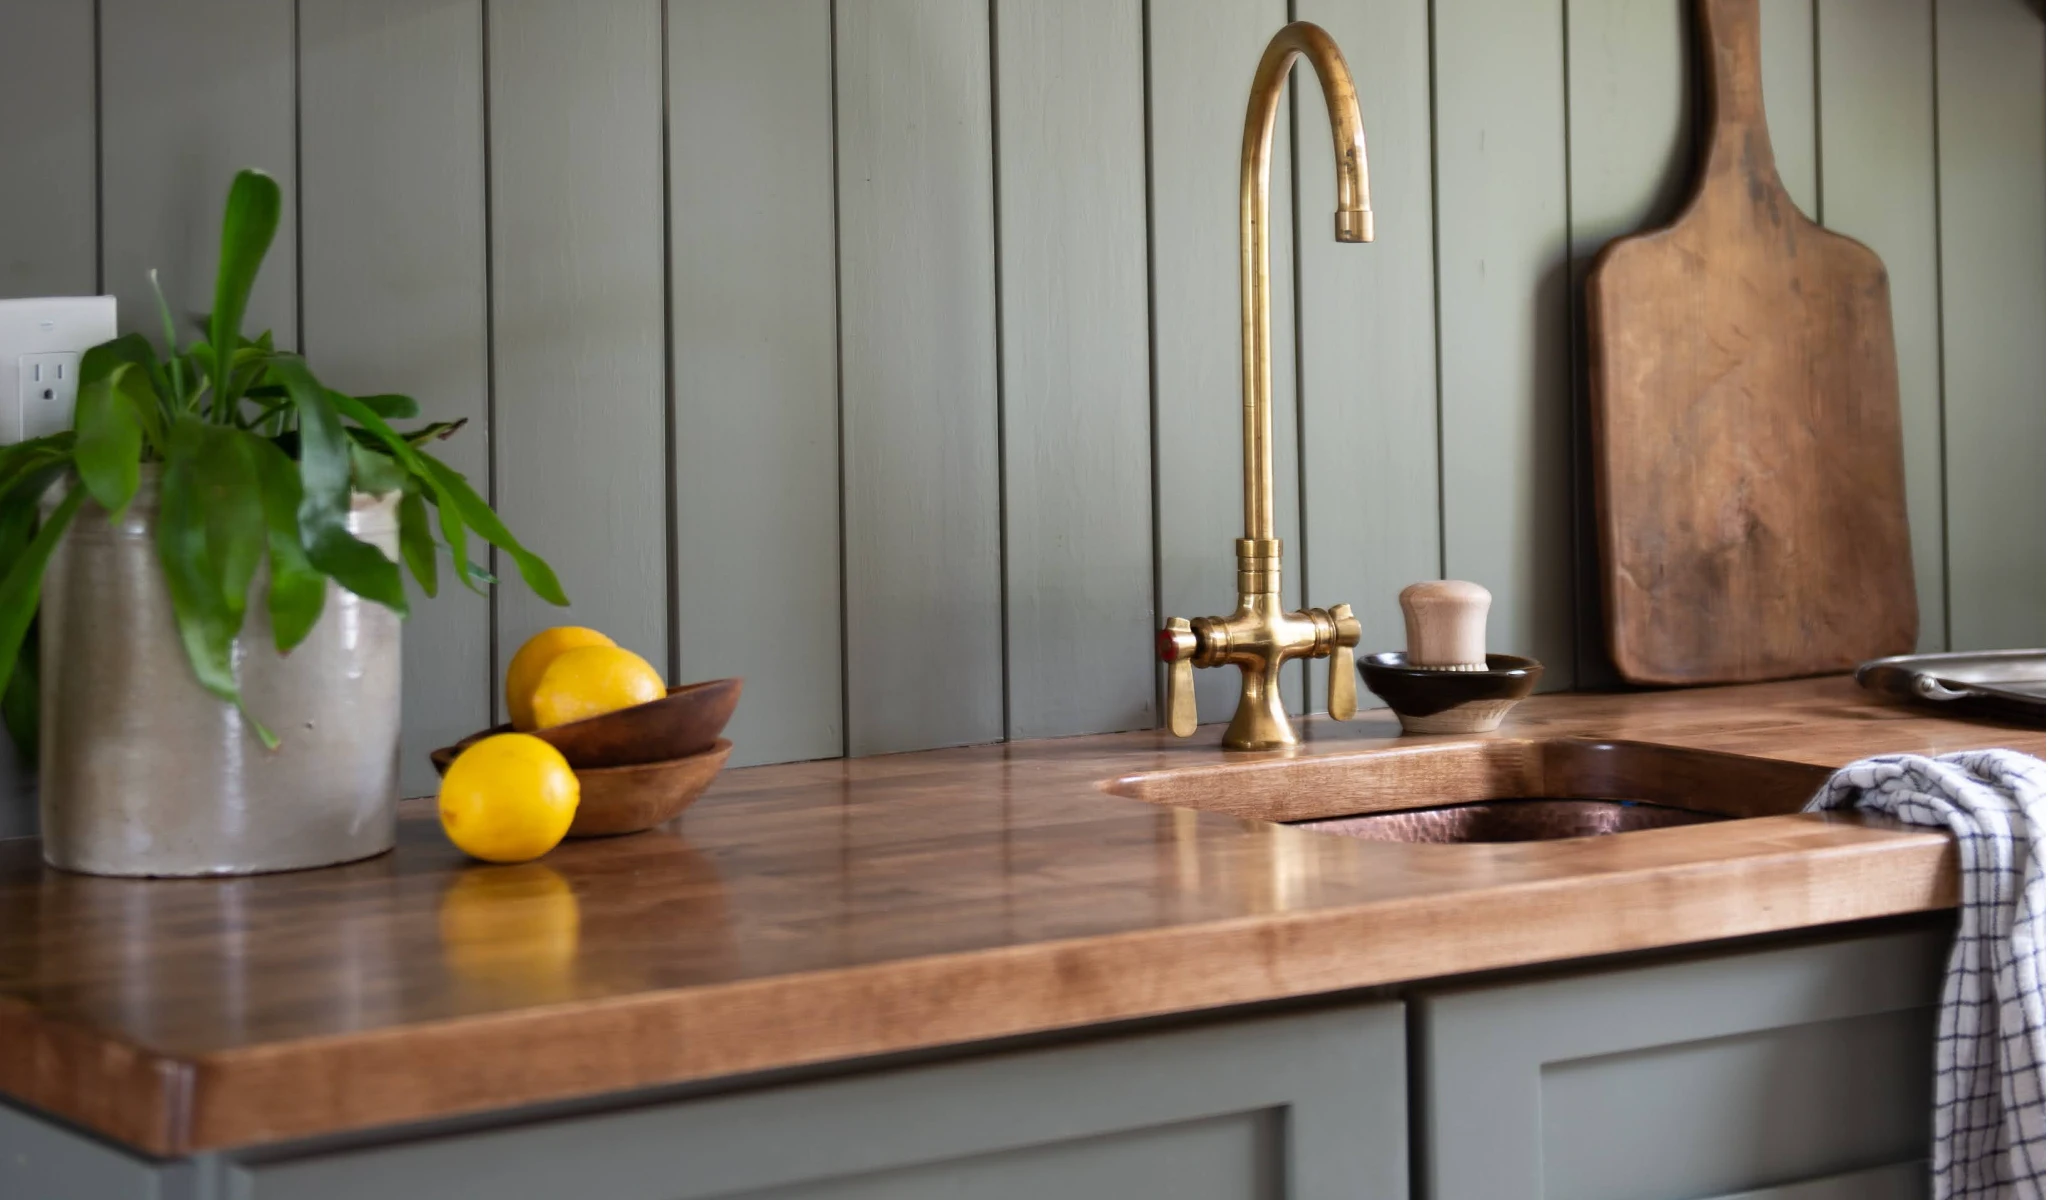 A wooden kitchen counter and sink with a brass faucet.